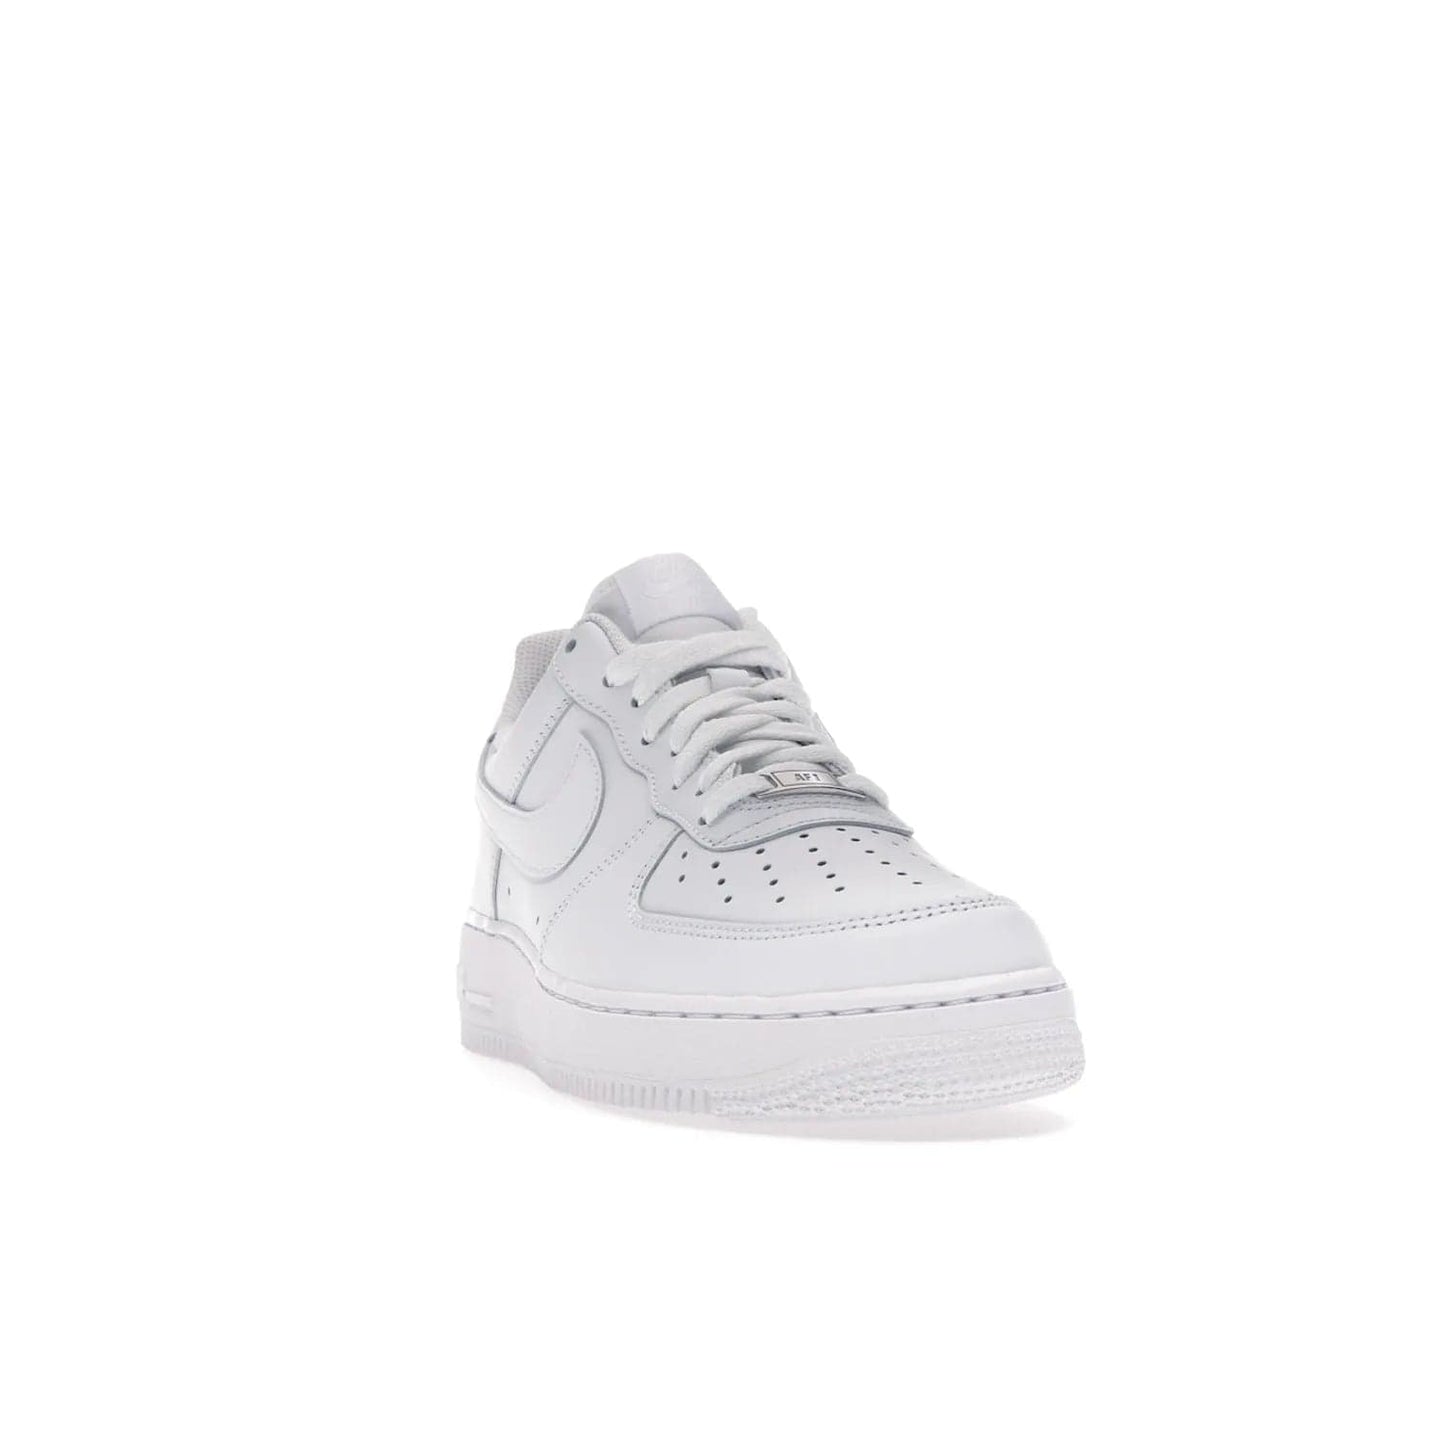 Nike Air Force 1 Low '07 White - Image 8 - Only at www.BallersClubKickz.com - ##
Iconic Swoosh overlays and crisp white sole make the classic Nike Air Force 1 Low White '07 an essential colorway. Classic for seasoned heads and new fans alike.